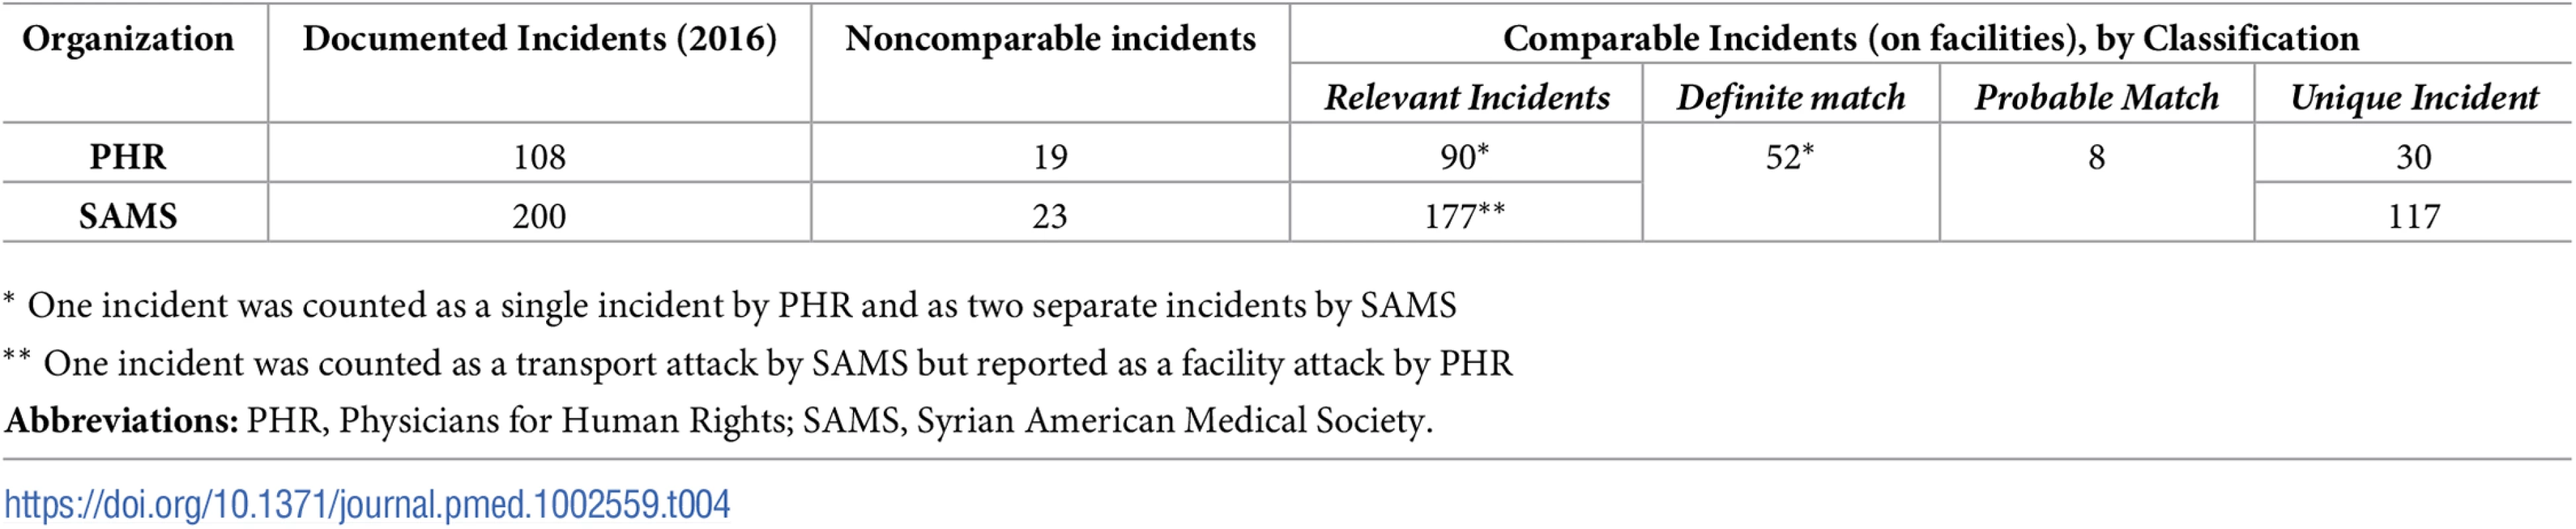 Incident comparison between PHR and SAMS, 2016.